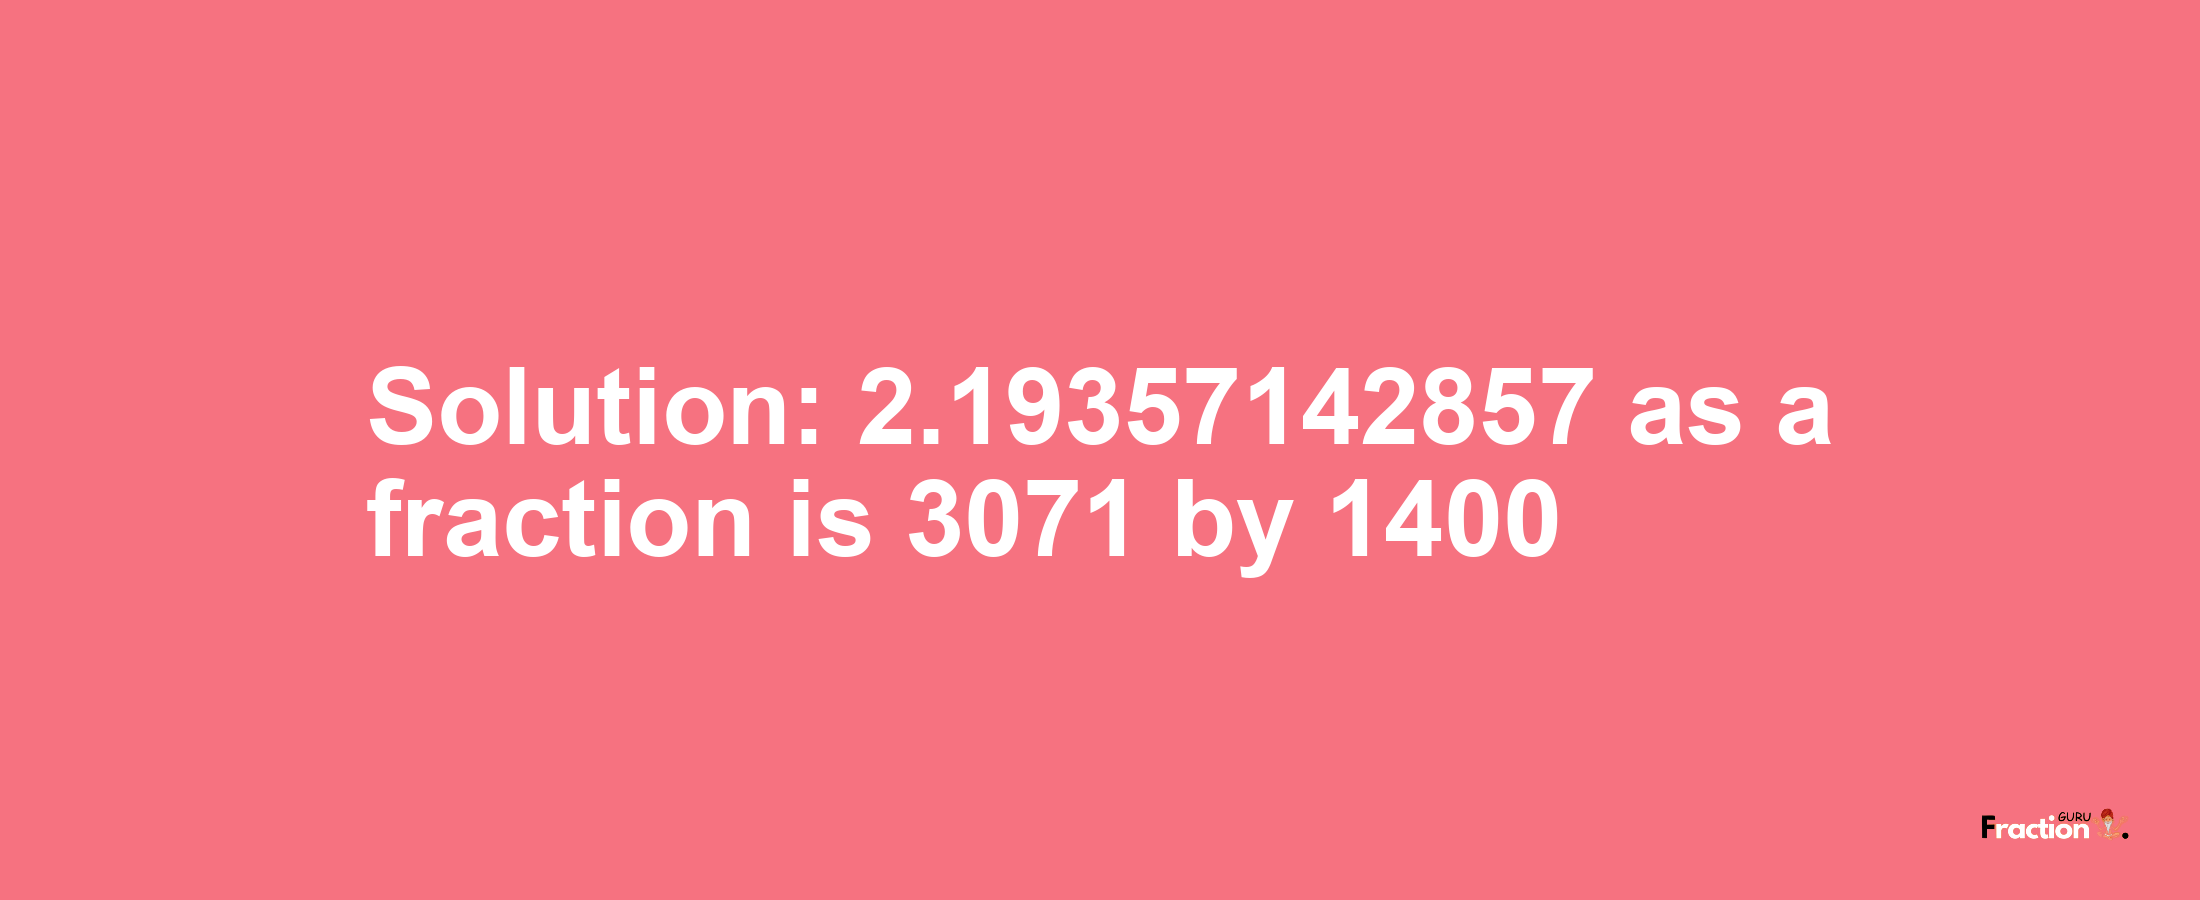 Solution:2.19357142857 as a fraction is 3071/1400